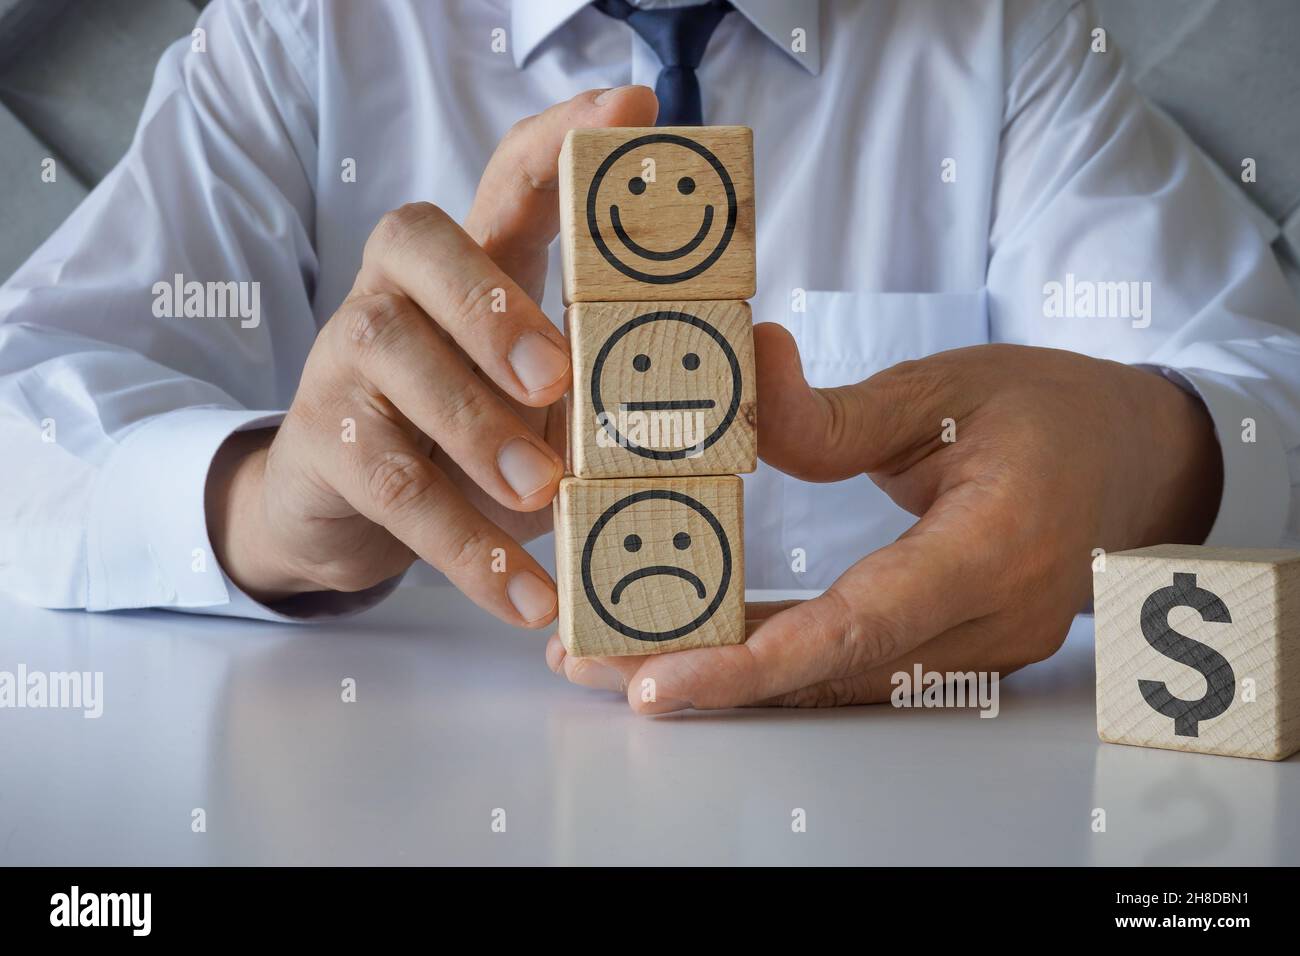 Wooden cubes with smile faces. Customer experience management concept. Stock Photo